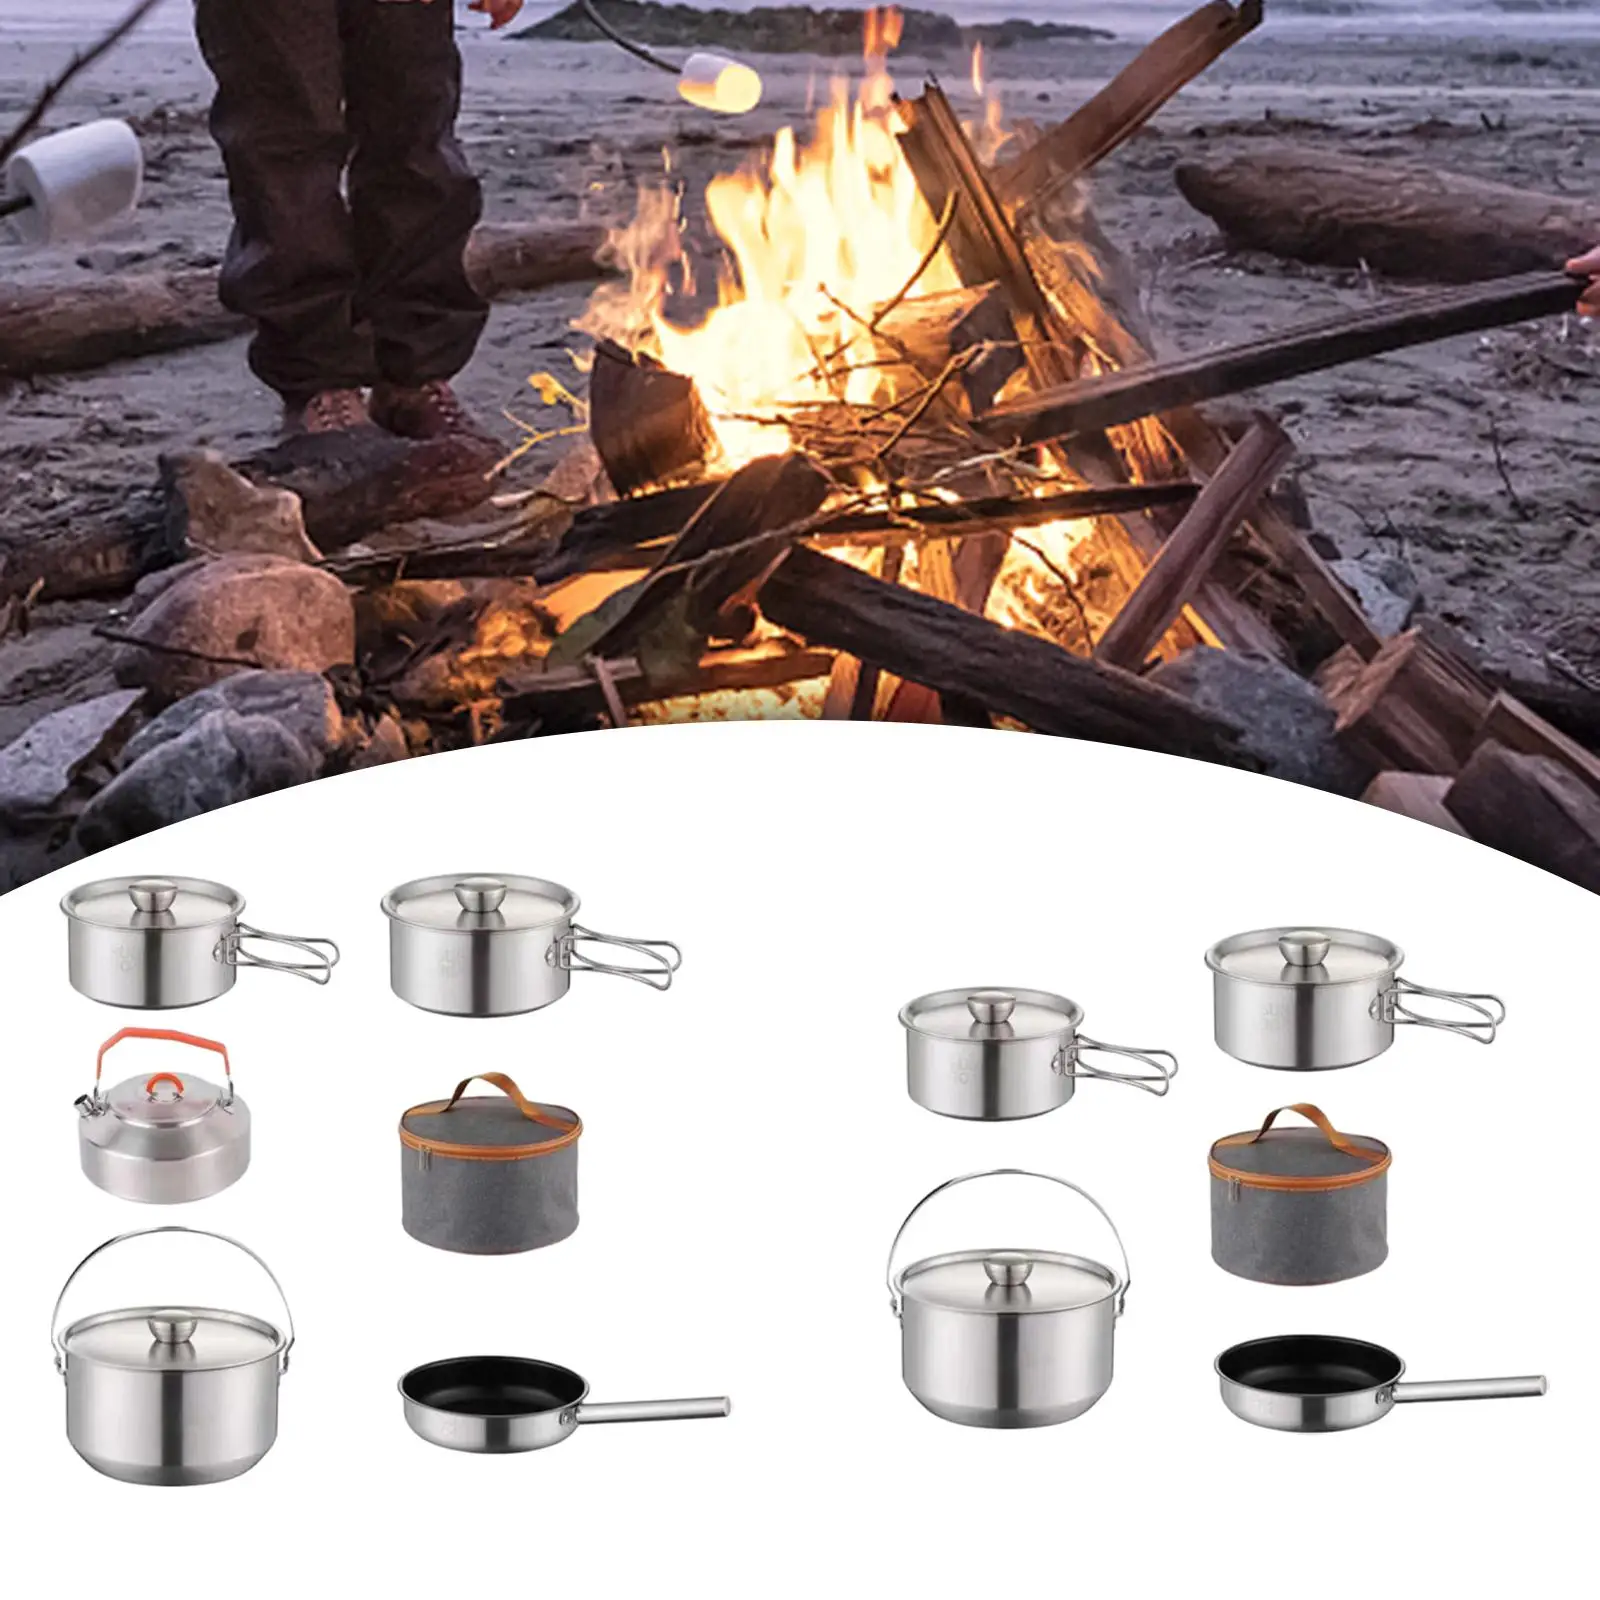 Camping Cookware Kit Hanging Pot Frying Pan Portable with Storage Bag Outdoor Pot for Hiking Dinner Indoors Survival Backpacking